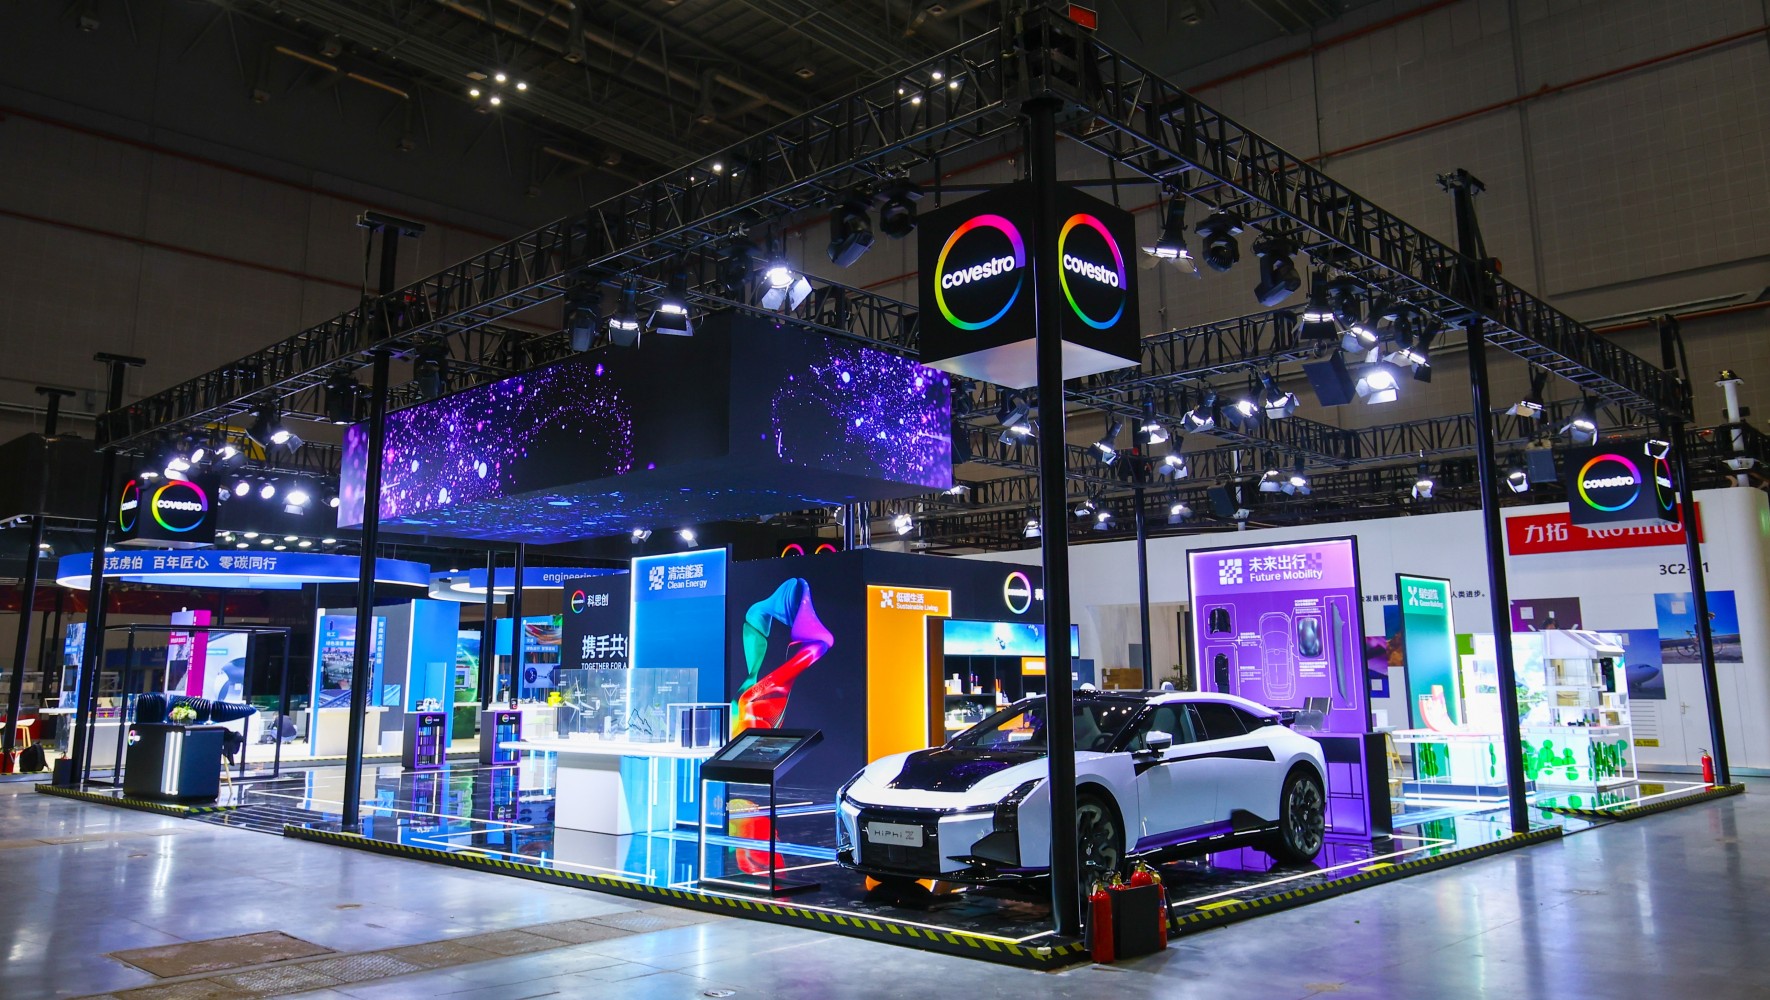 Covestro to strengthen partnerships at China International Import Expo (CIIE)